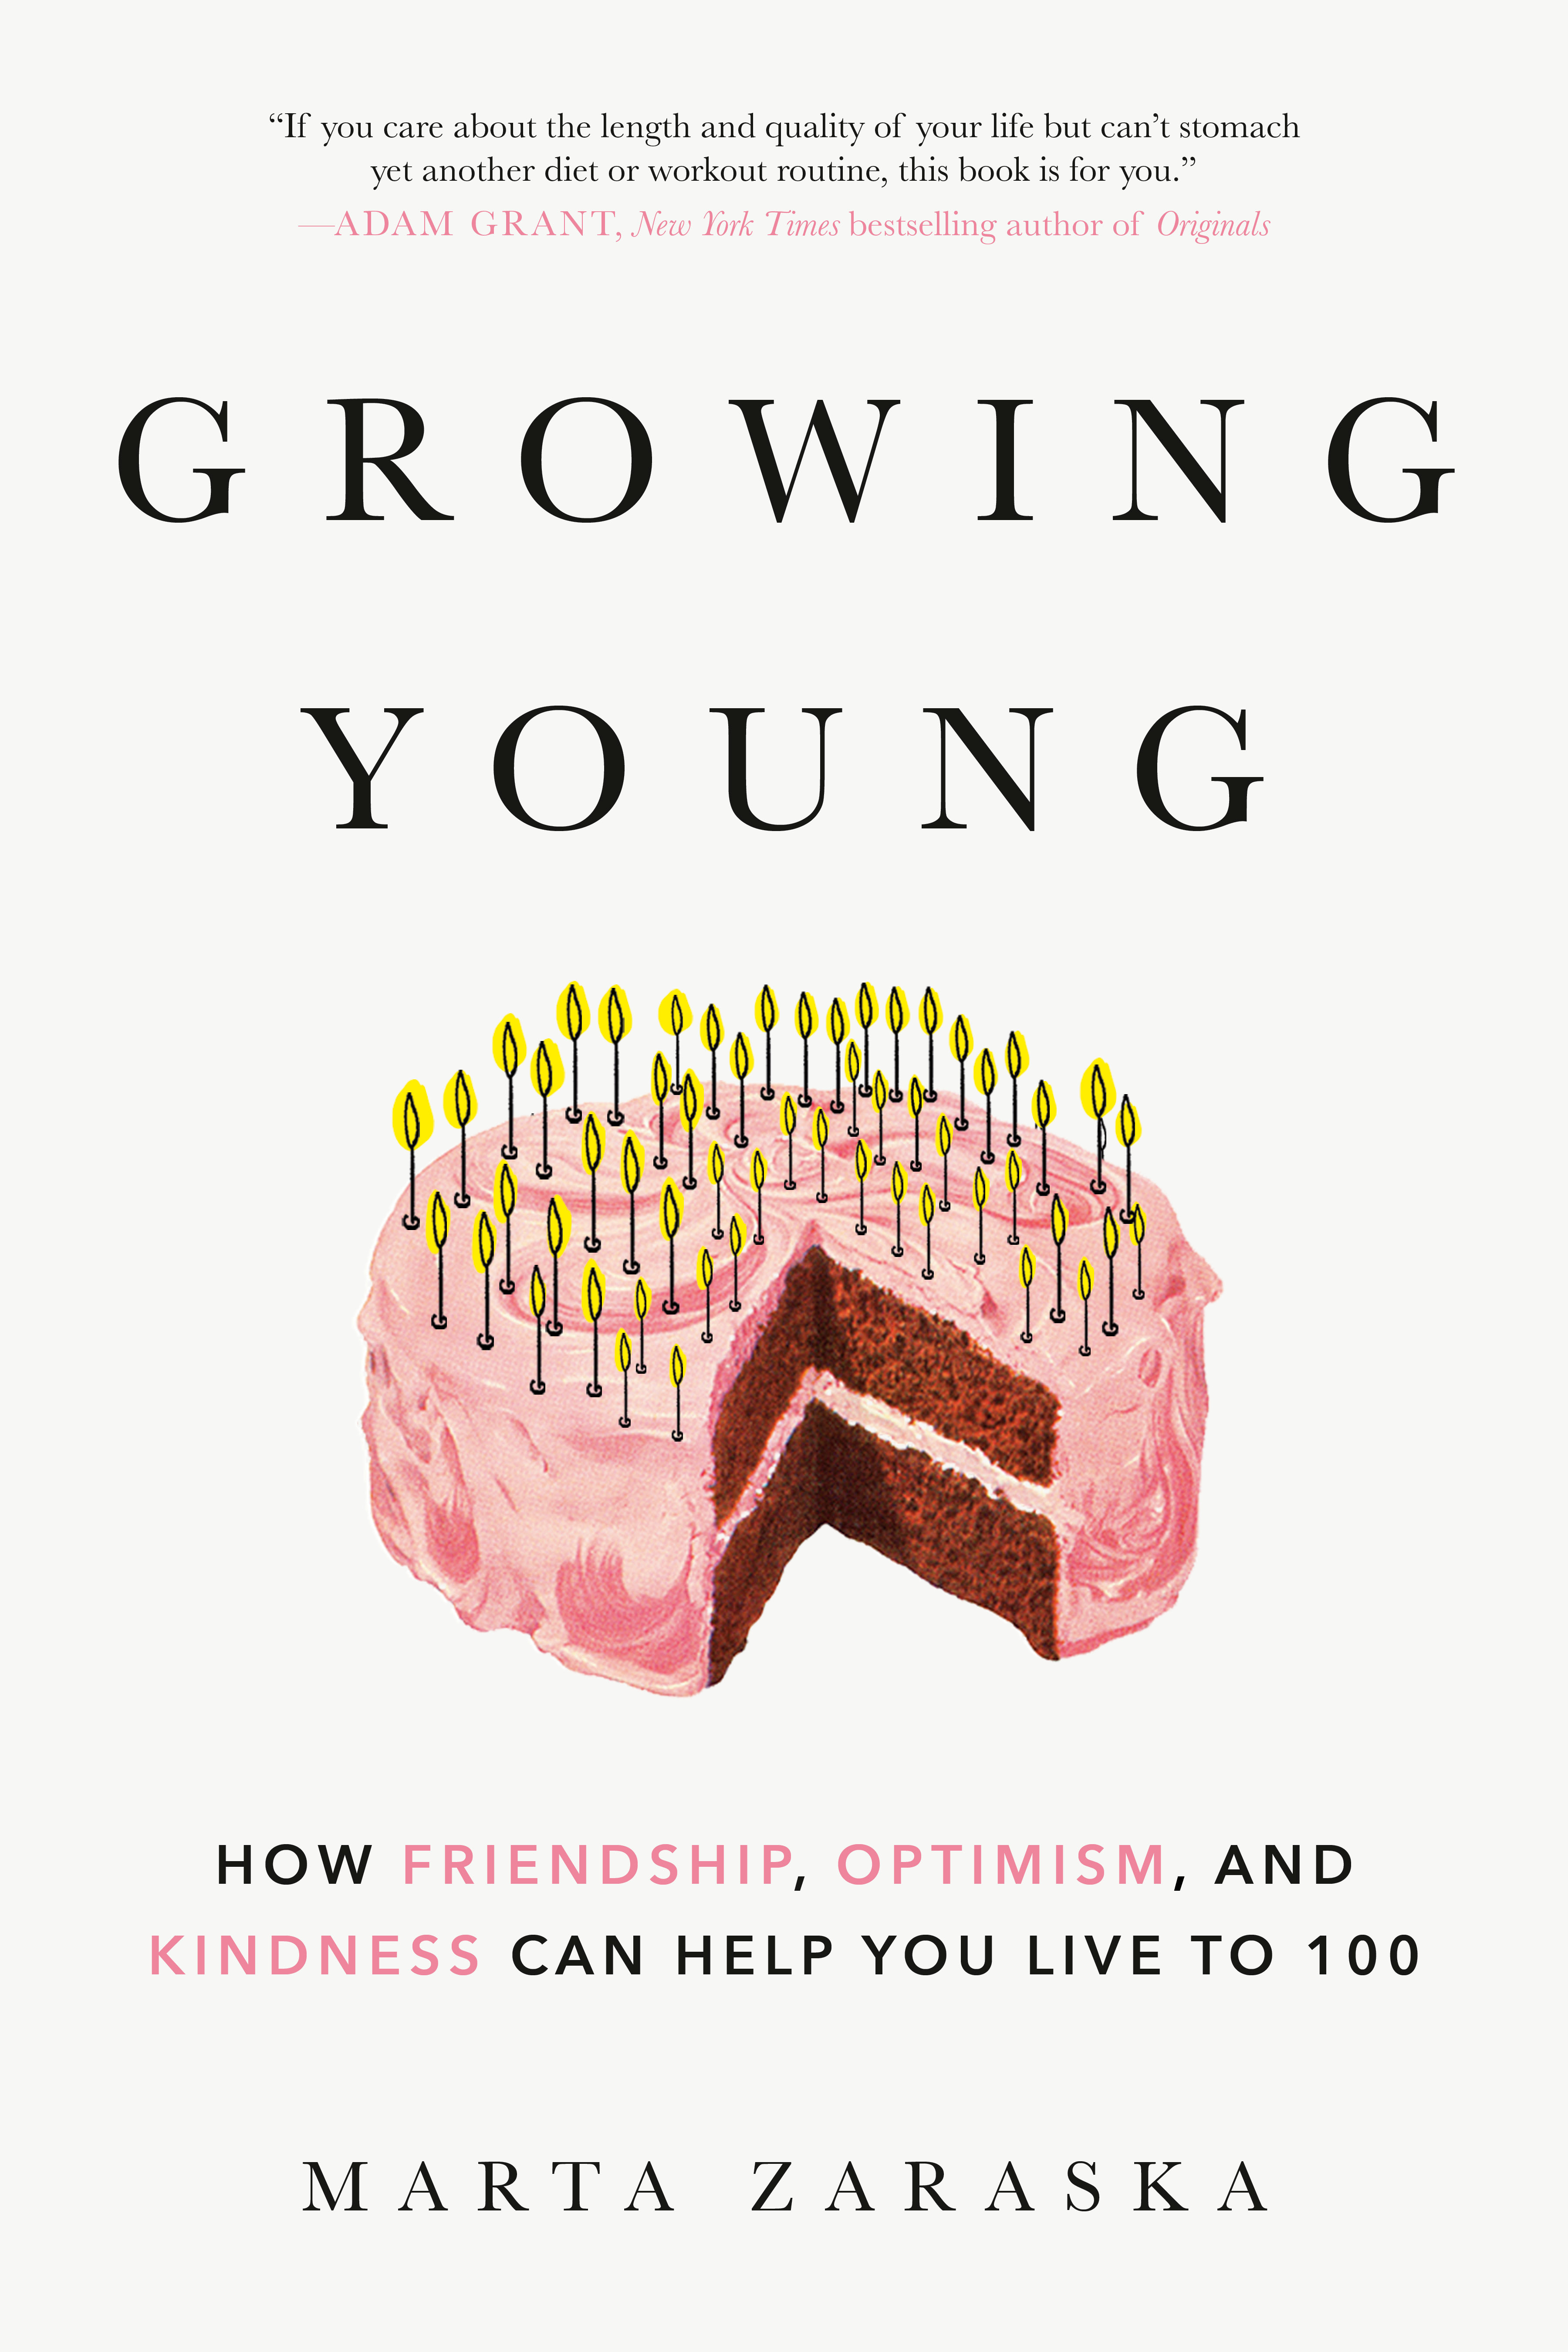 Growing Young : How Friendship, Optimism, and Kindness Can Help You Live to 100 | Psychology & Self-Improvement